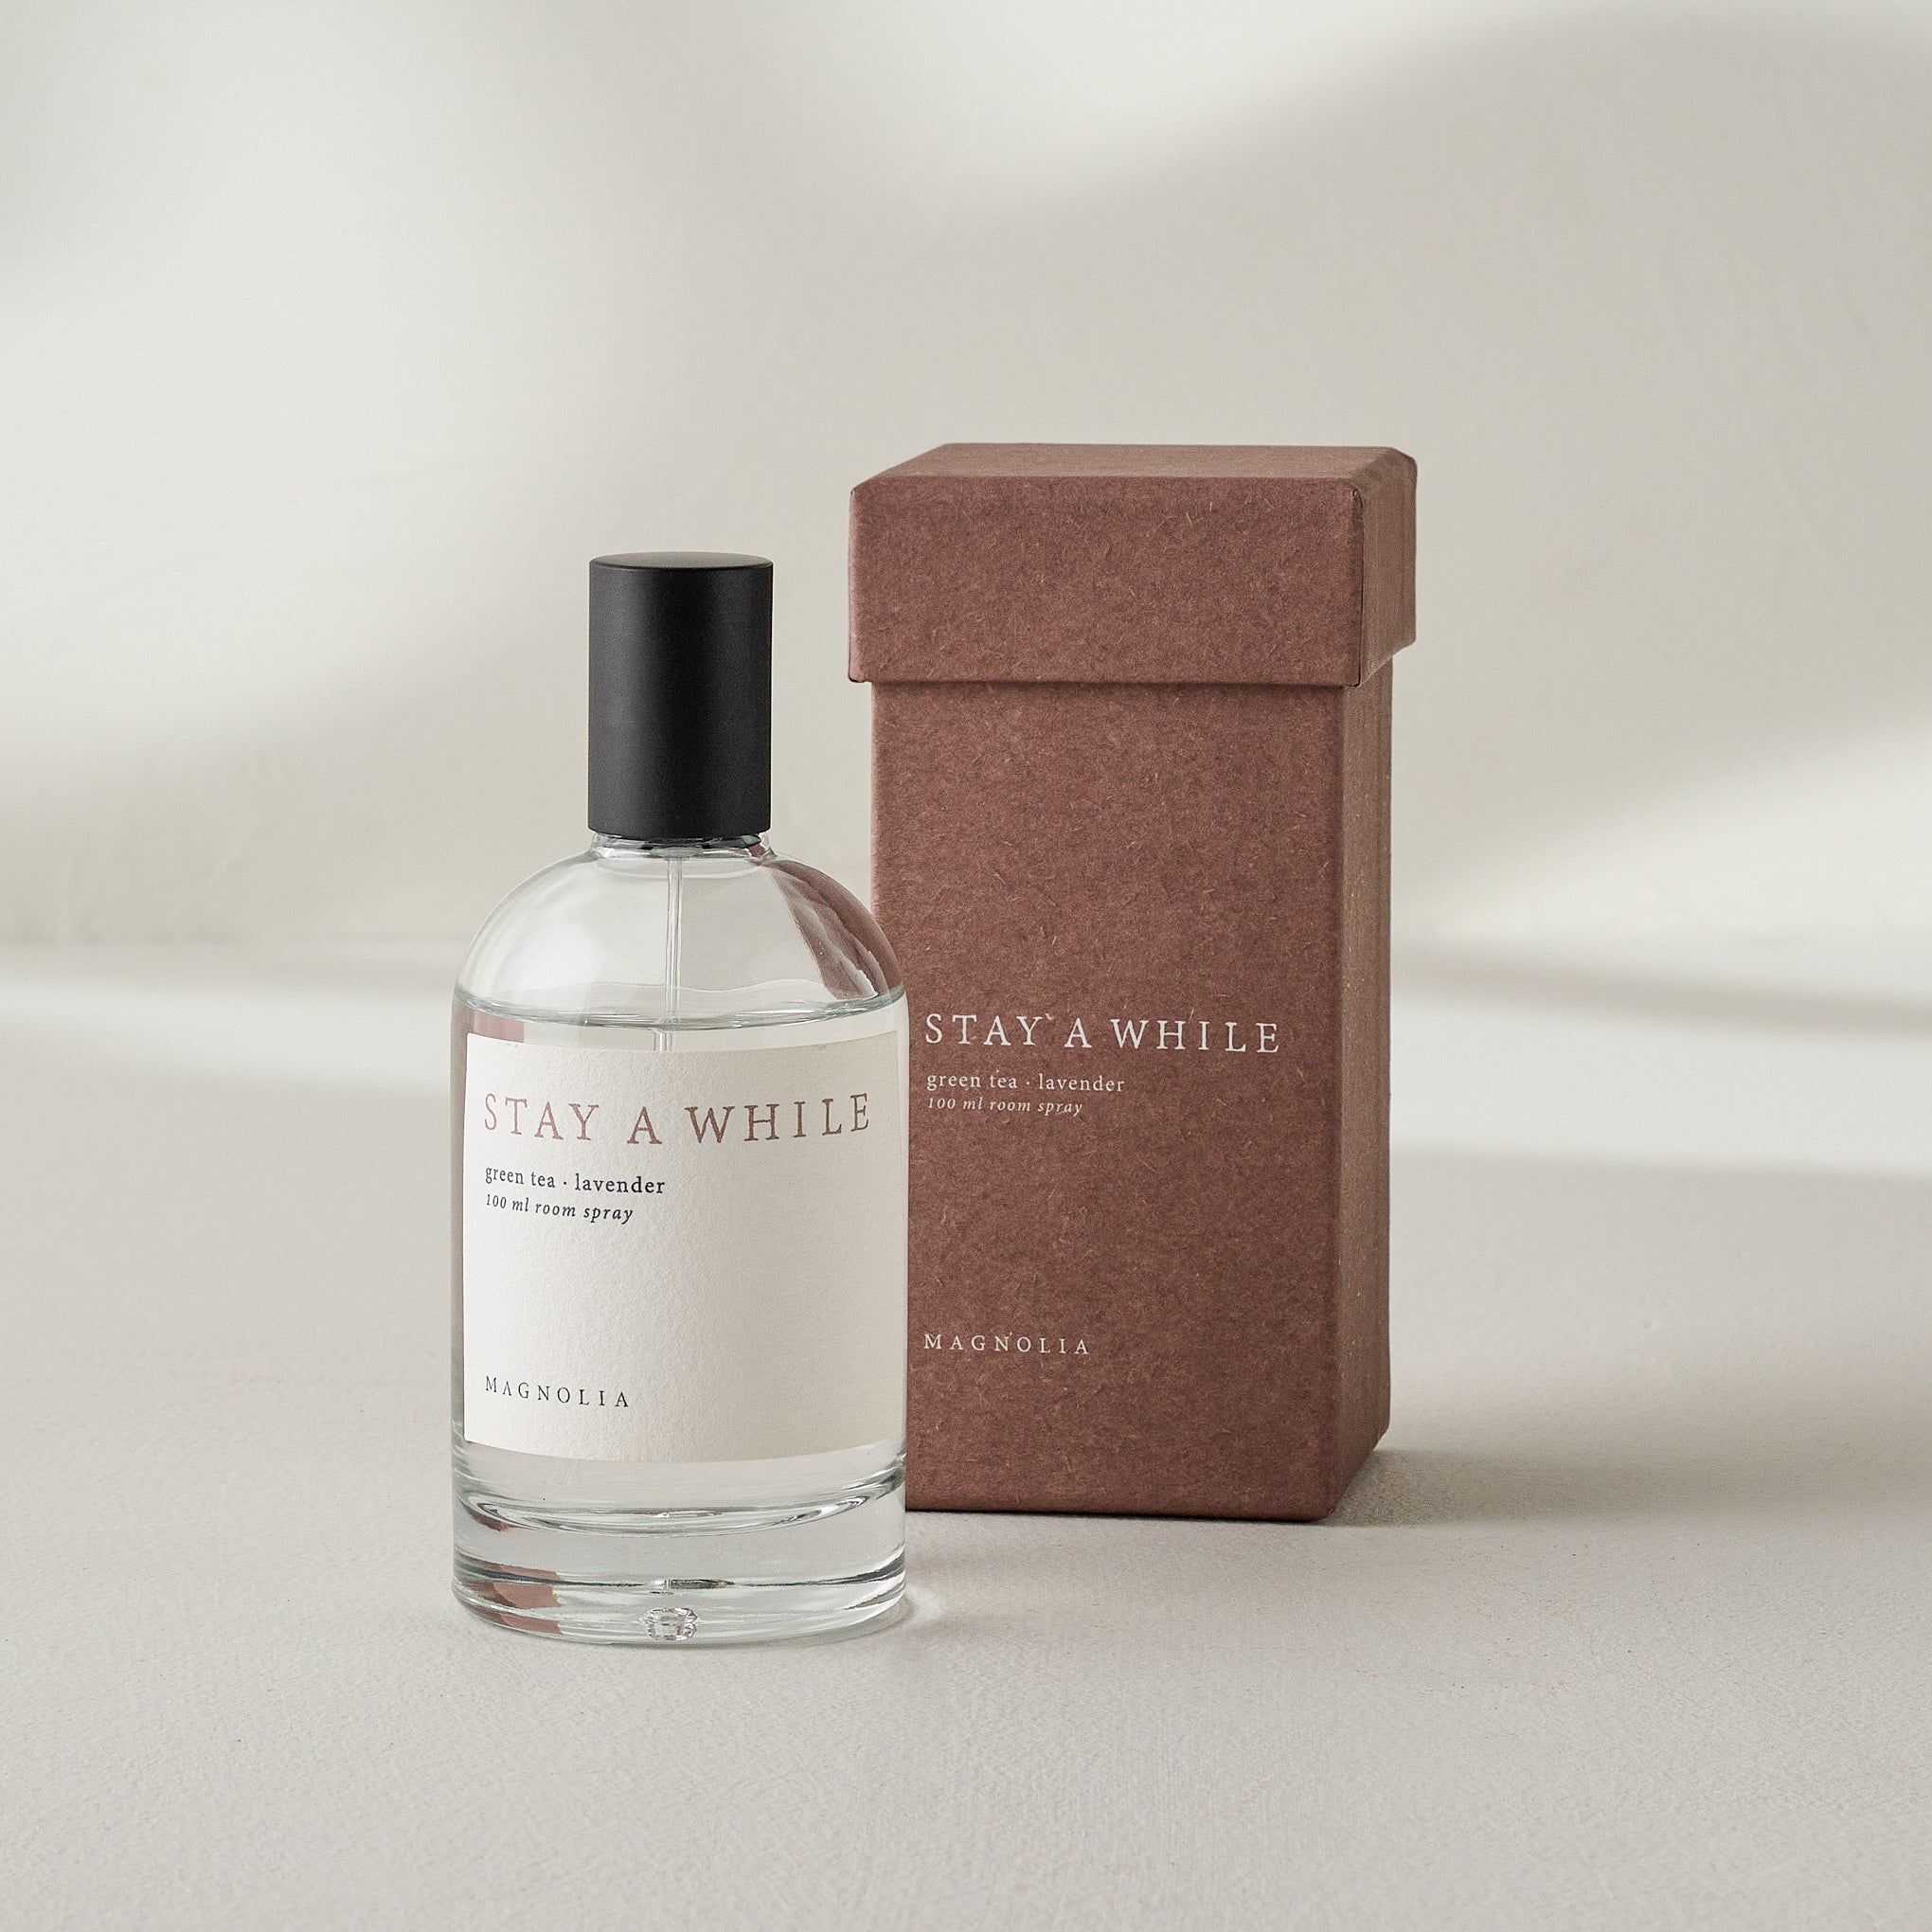 stay a while room spray with box $30.00